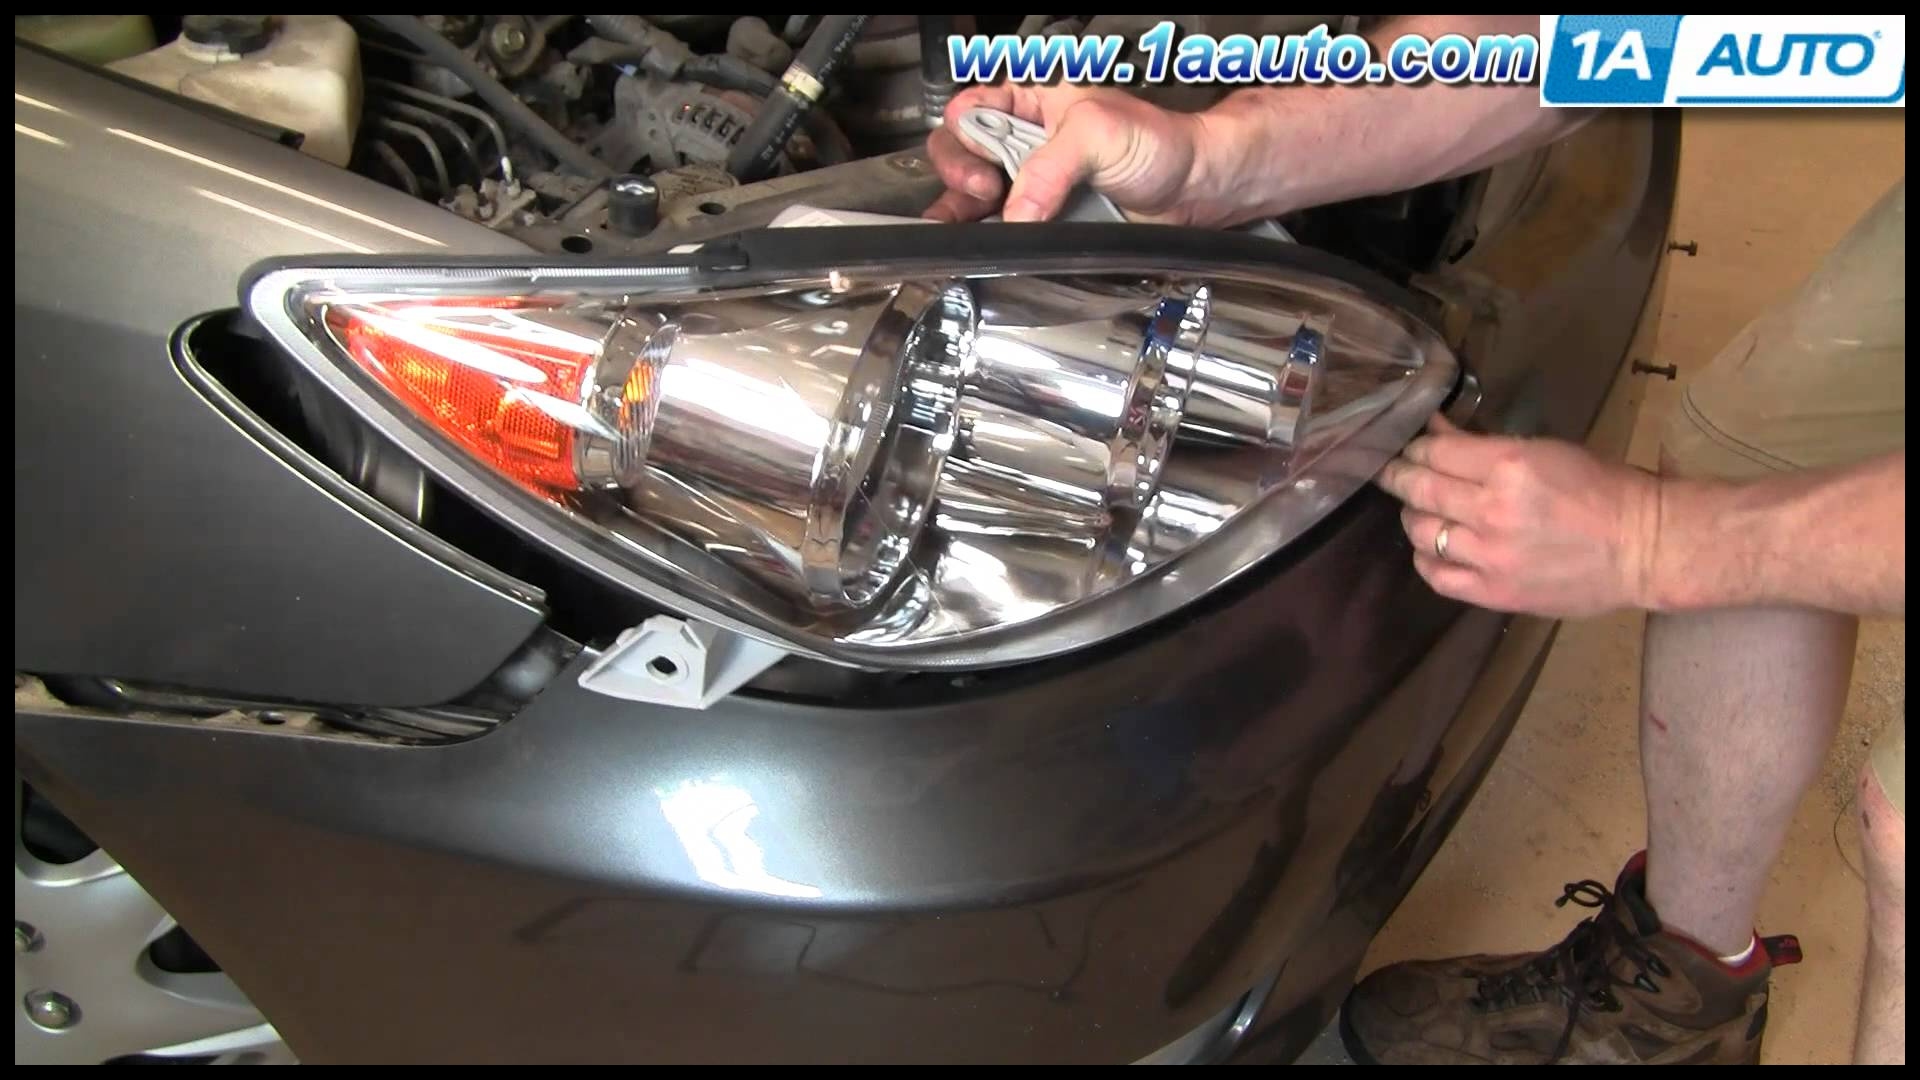 Toyota Matrix Headlight Lens Replacement Fresh How to Install Replace Headlights toyota Camry 02 06 1aauto